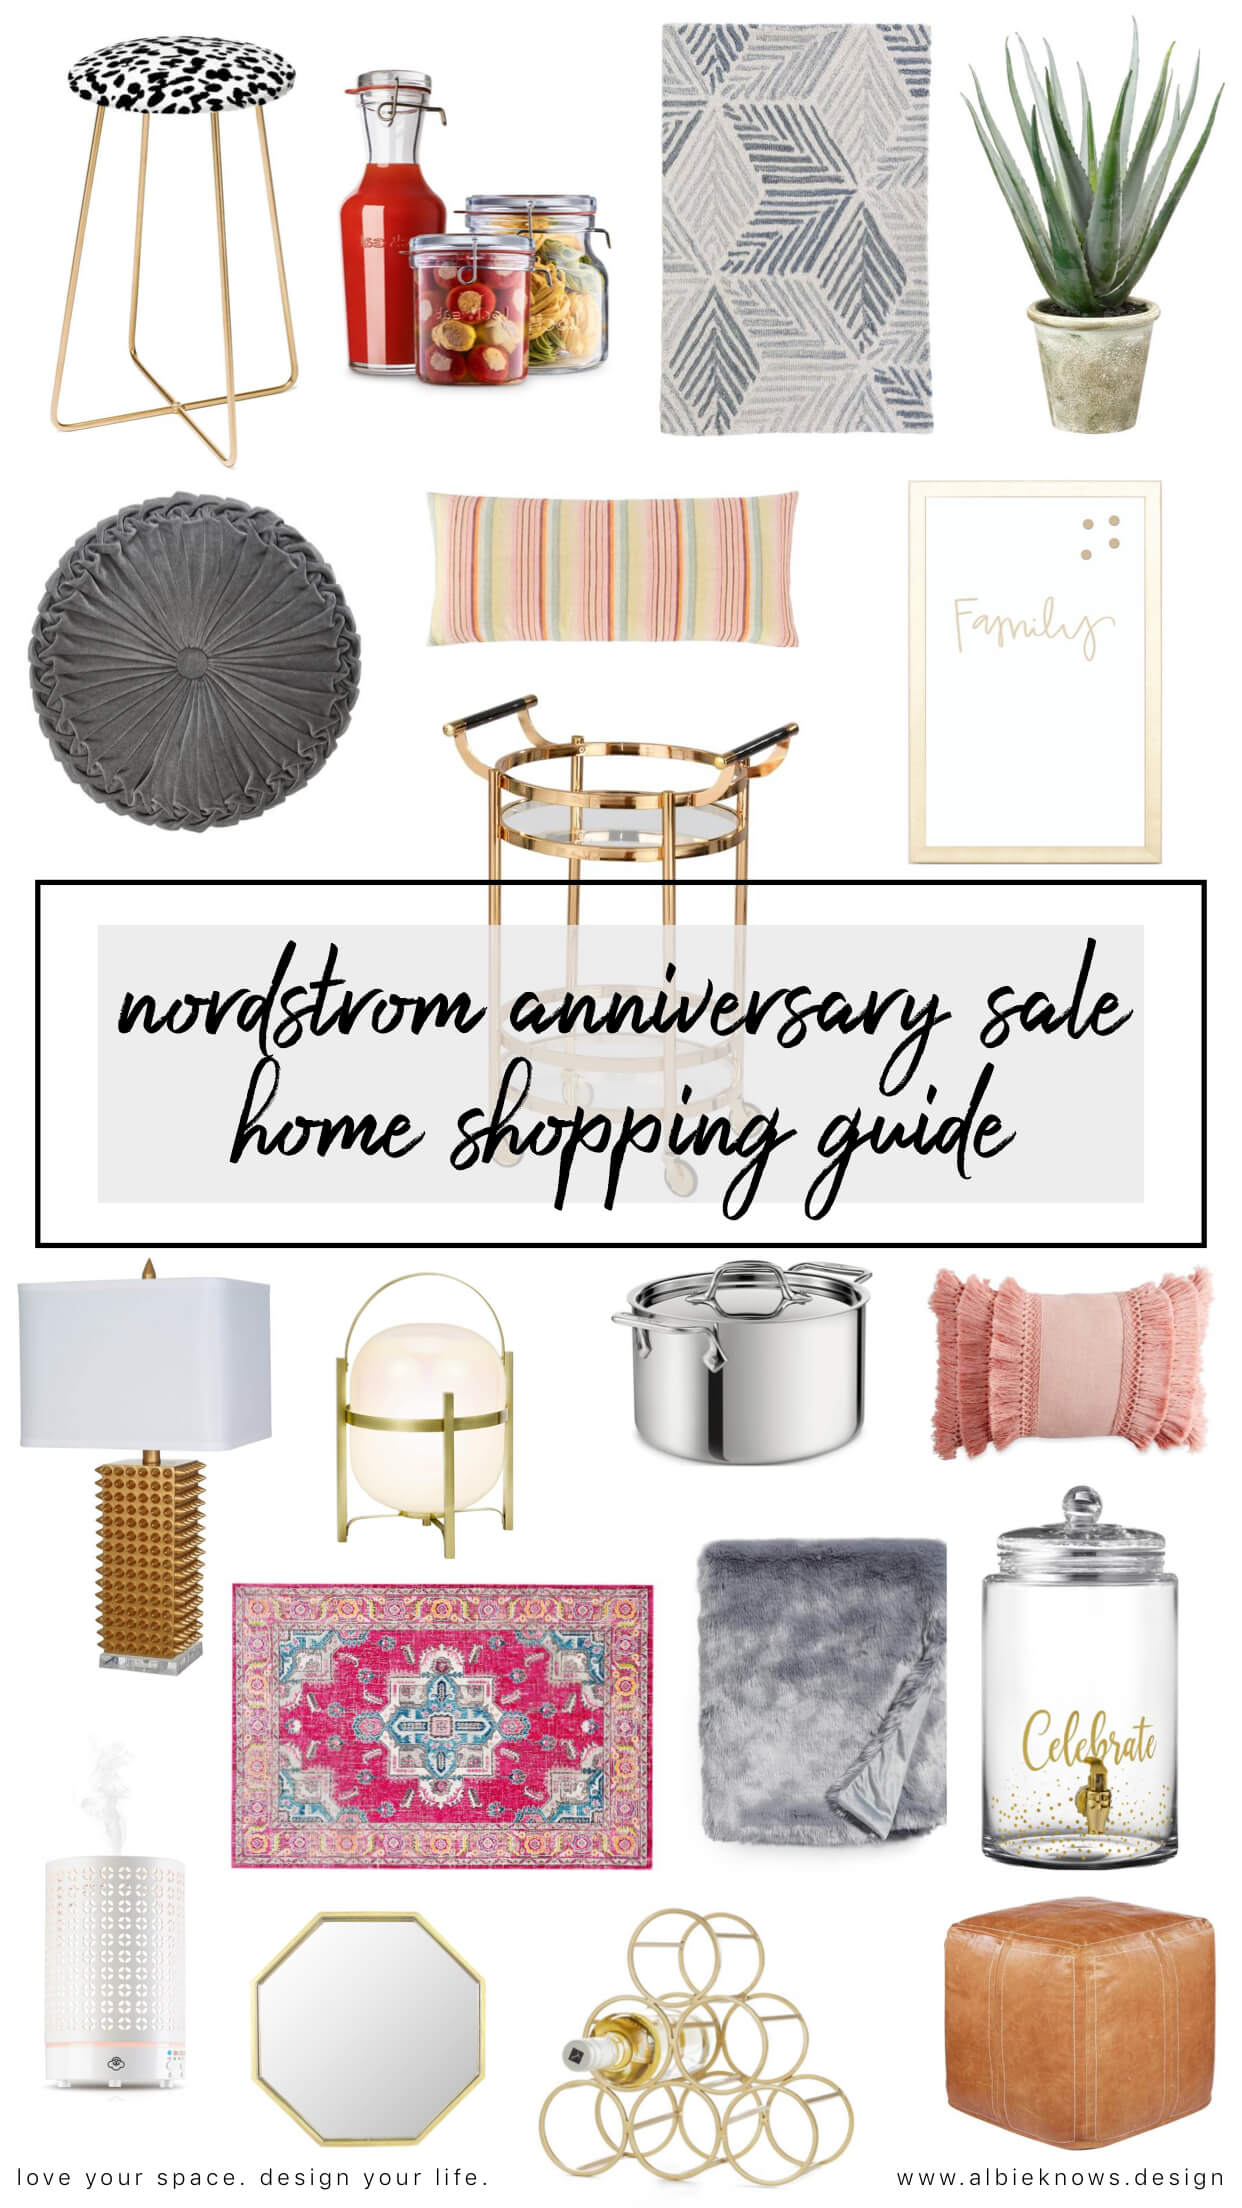 Albie Knows Nordstrom Anniversary Sale Home Finds 1.jpeg